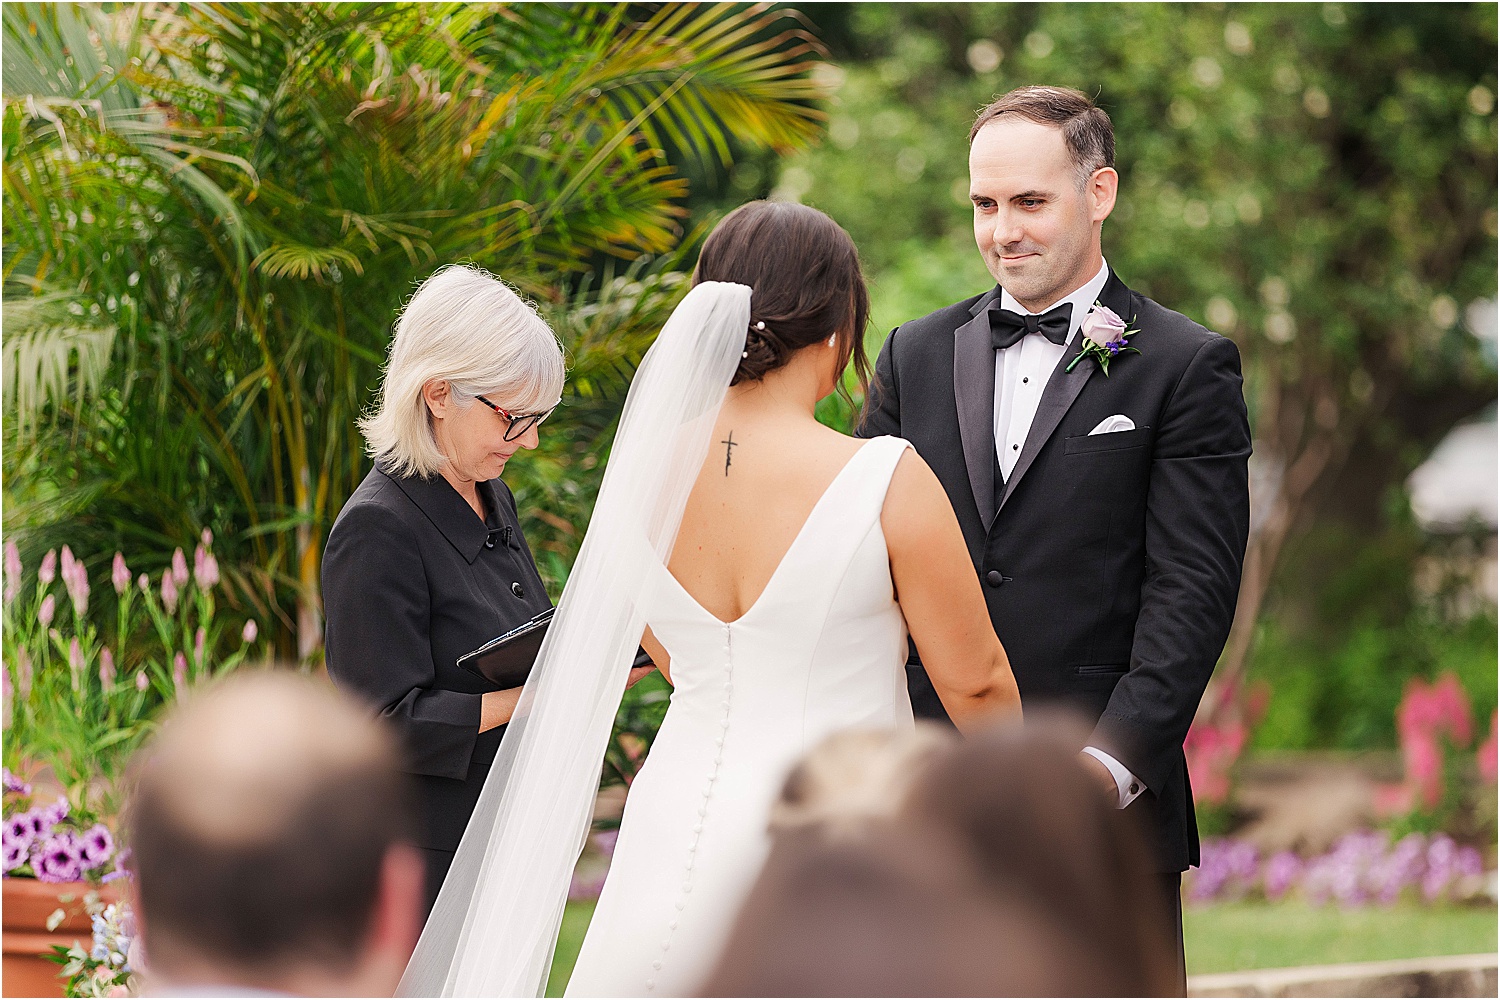 groom looking at bride during wedding ceremony • Wild Weather - Love at a Phipps Conservatory Outdoor Garden Wedding